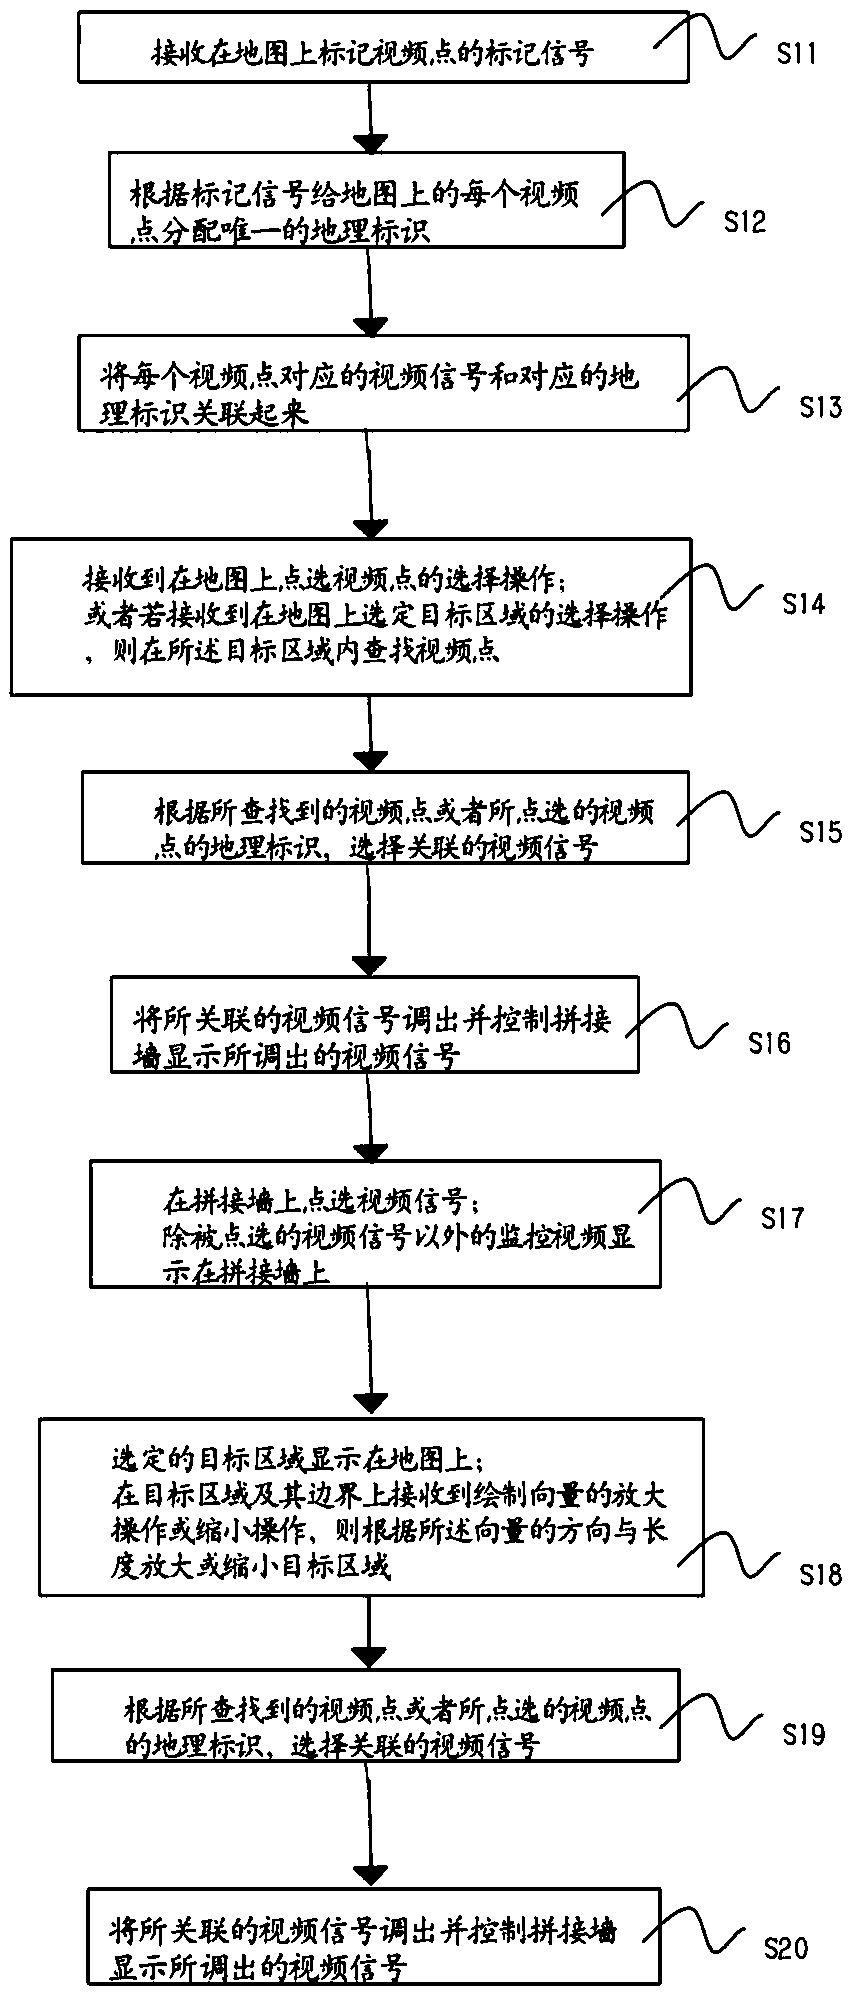 Signal display method and system based on GIS (geographic information system) map